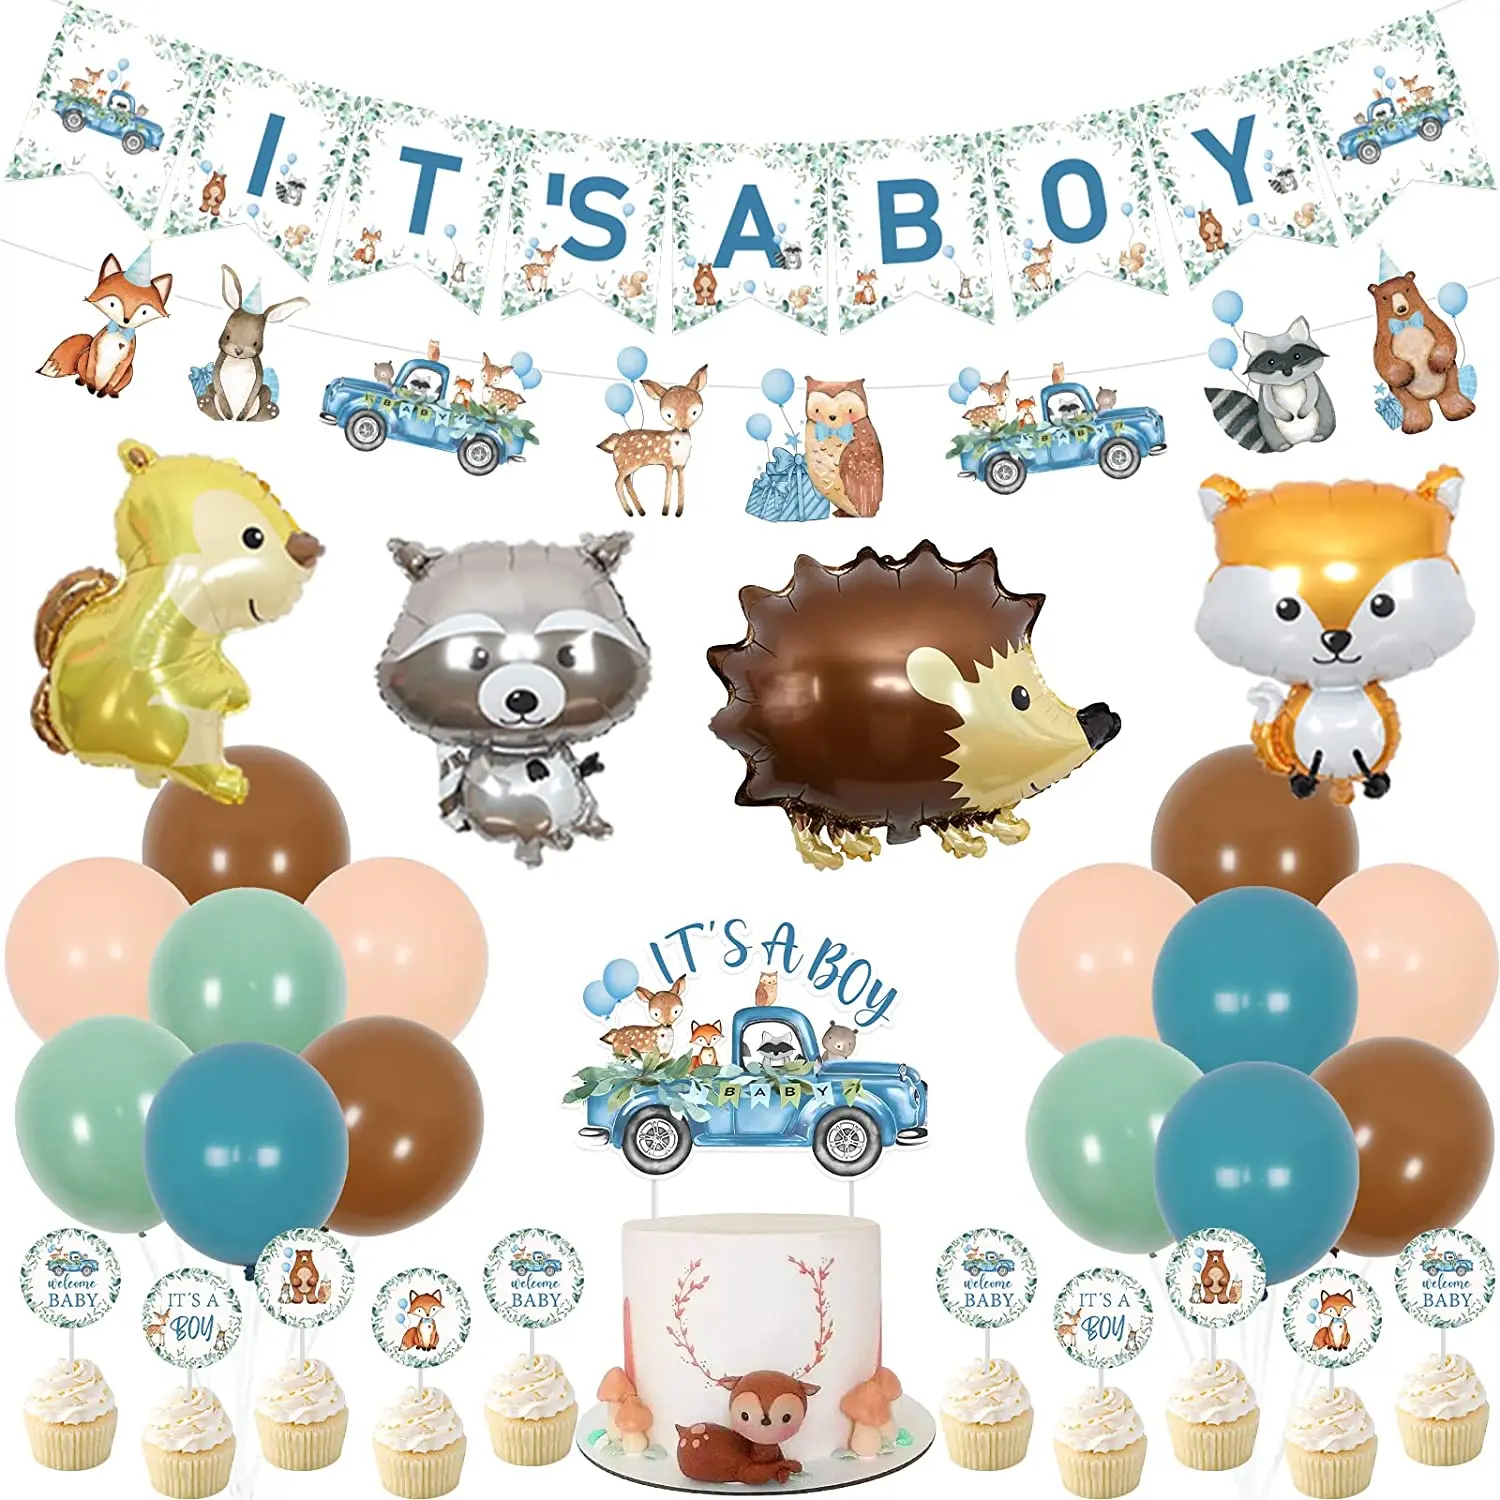 

Woodland Animal Cake Topper, Forest Animal Balloons, Baby Shower Decorations, It's A Boy Banner, Jungle Gender Party Supplies